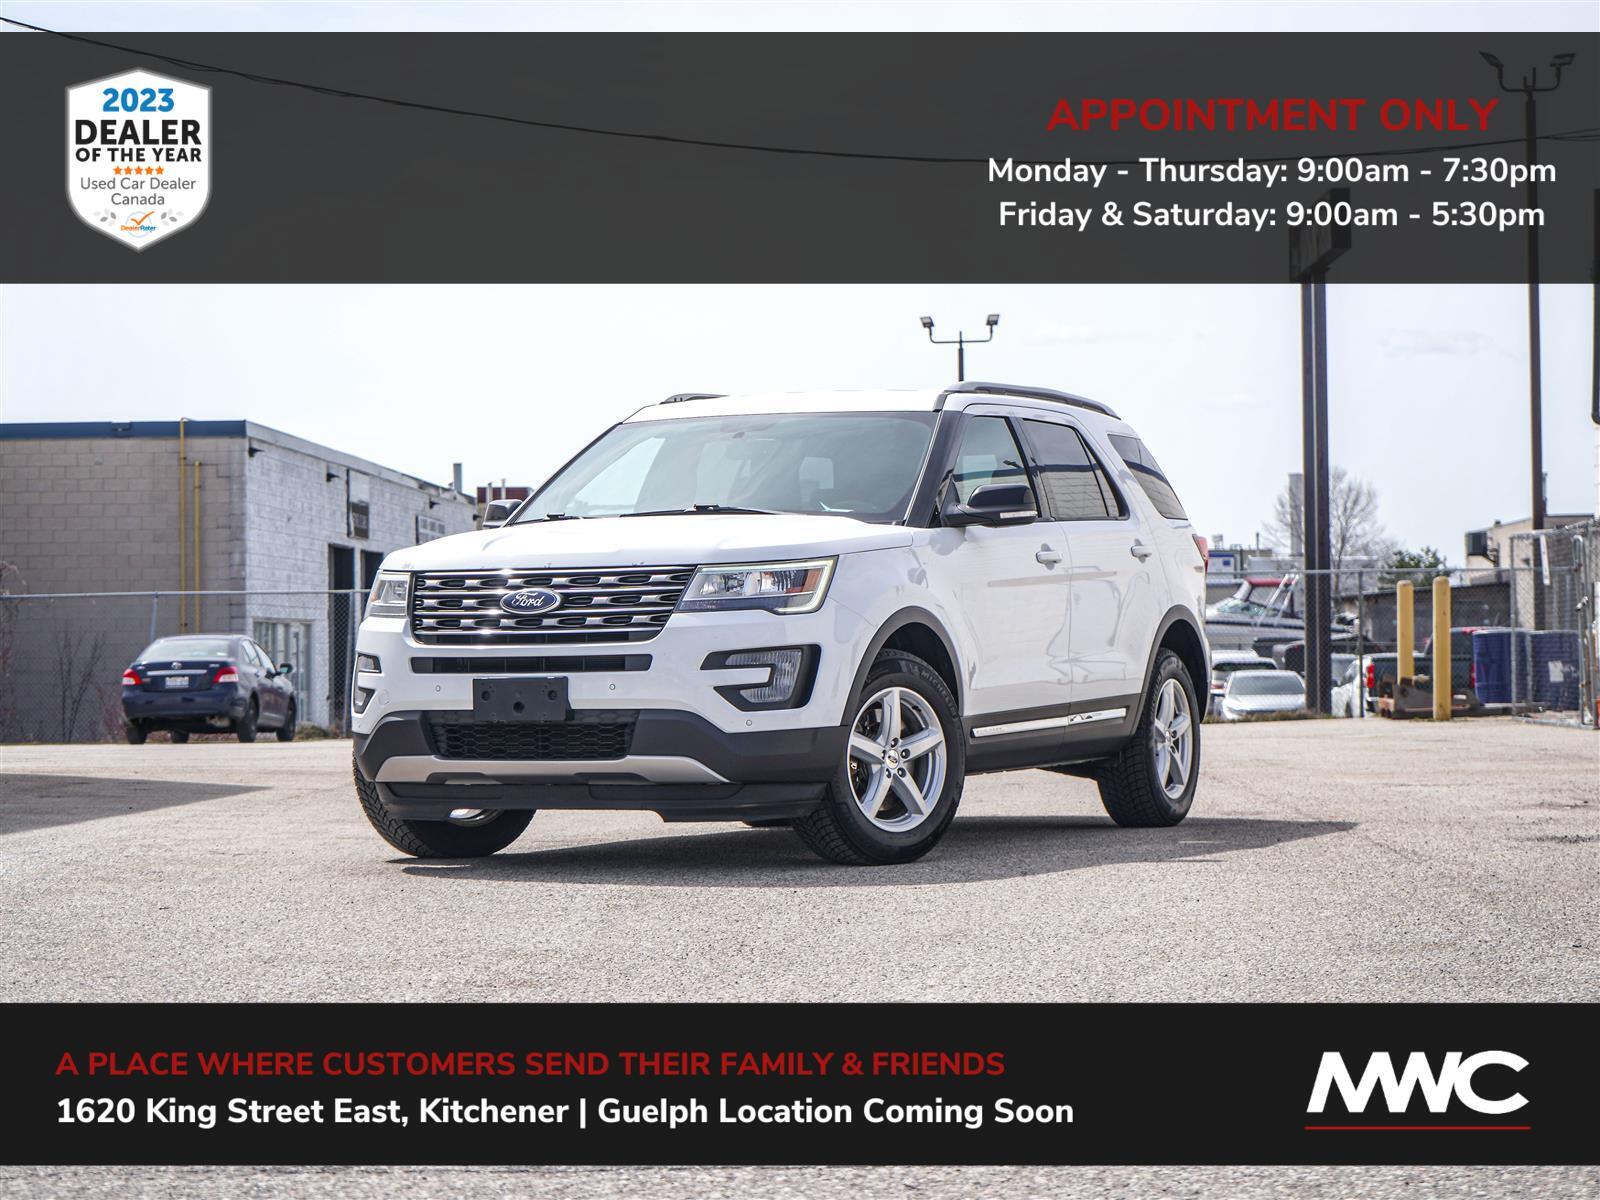 2017 Ford Explorer XLT | 4WD | IN GUELPH, BY APPT. ONLY